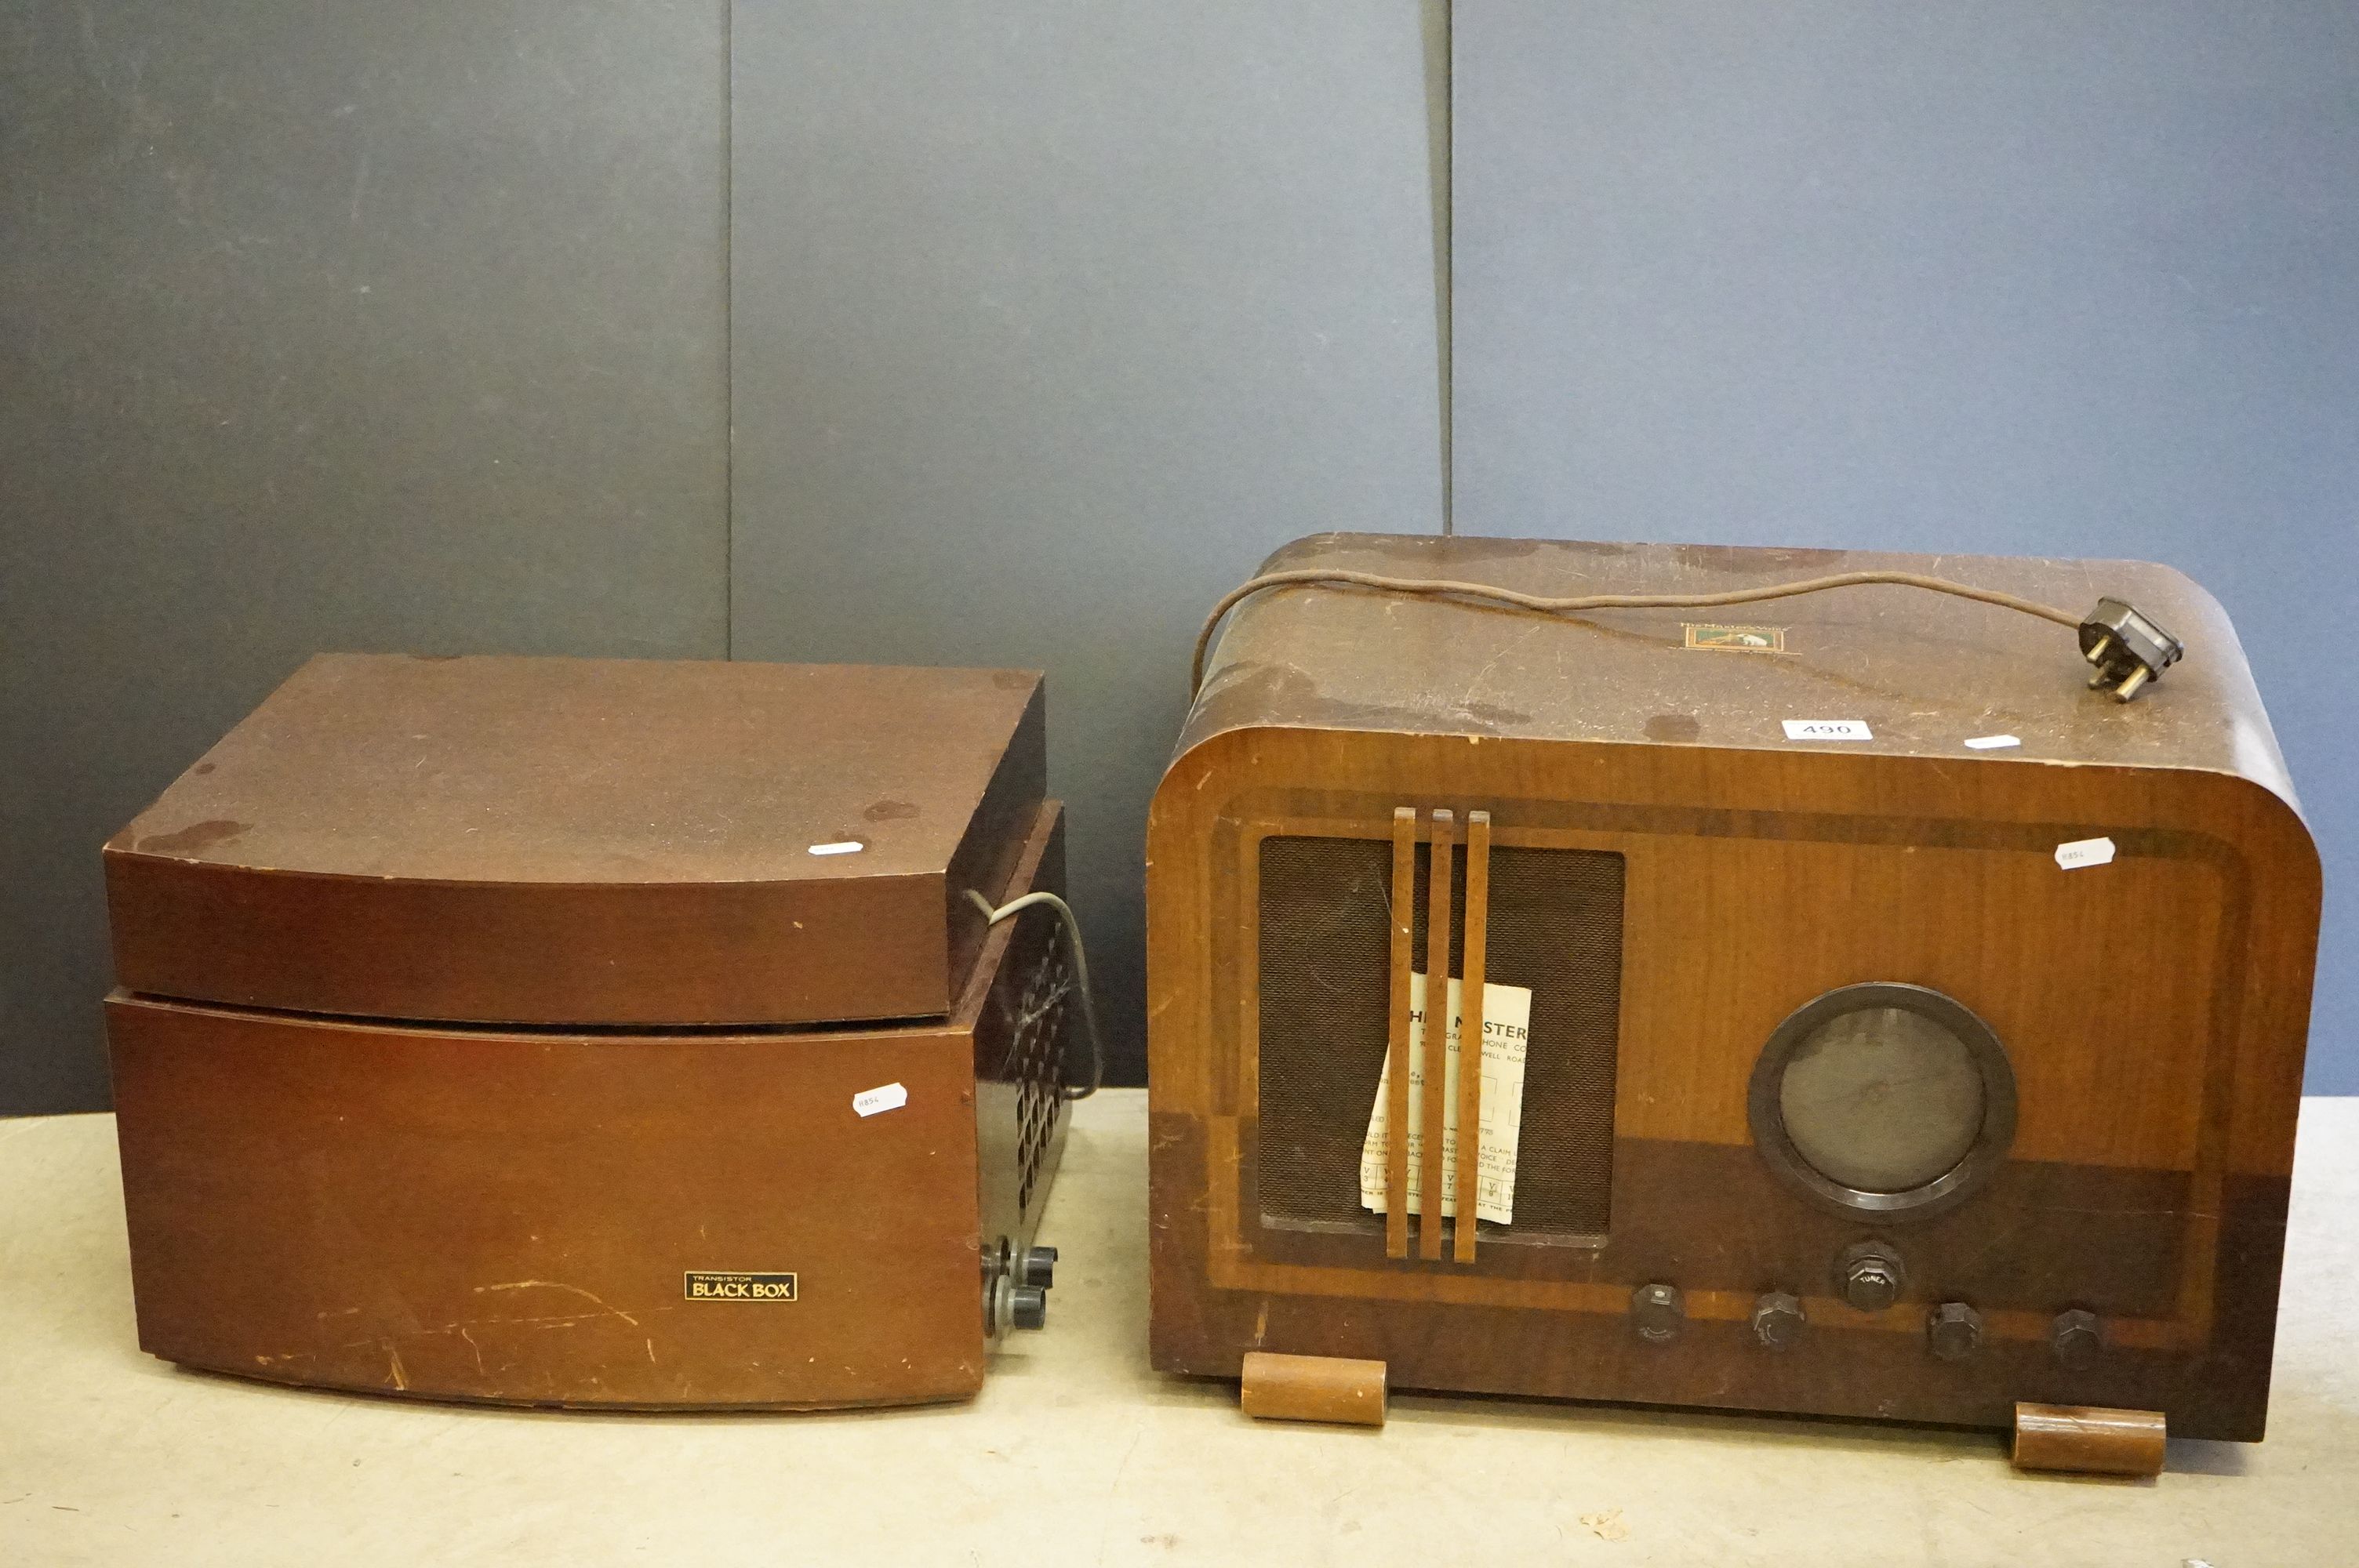 A vintage wooden cased HMV radio together with a wooden cased Monarch record player.